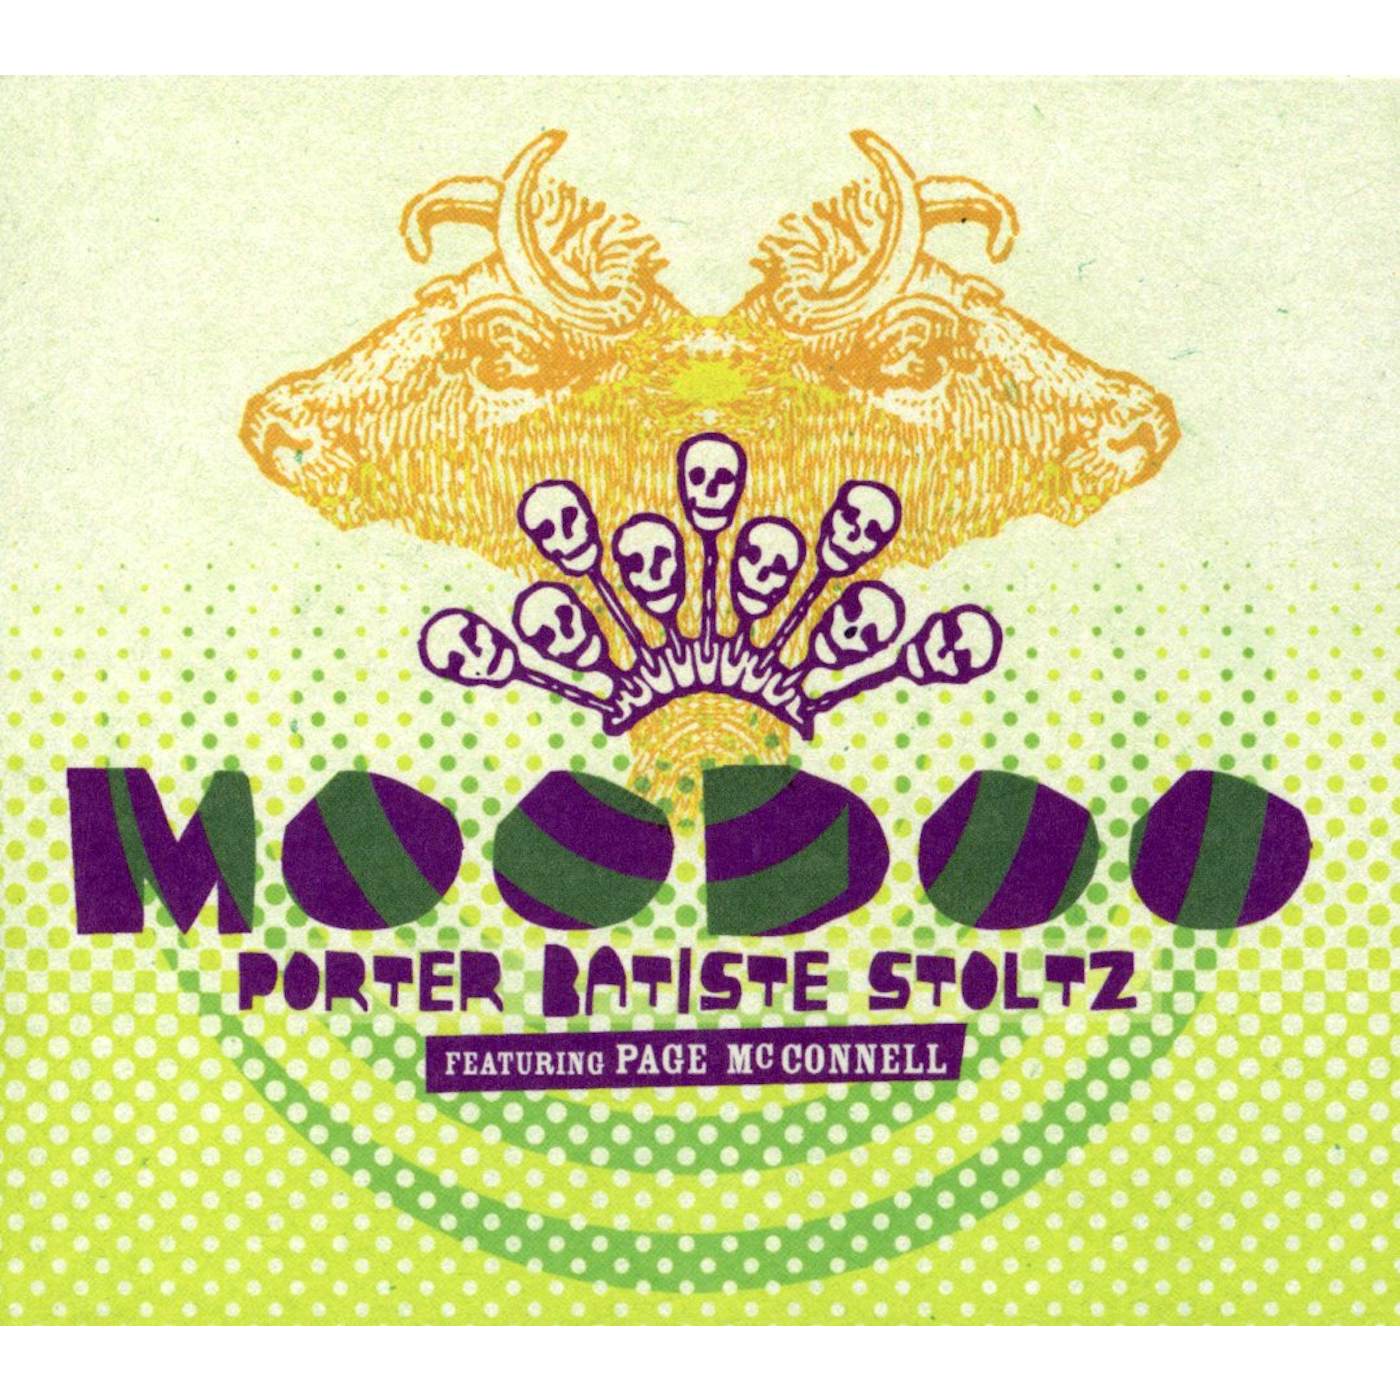 Porter Batiste Stoltz MOODOO WITH PAGE MCCONNELL CD